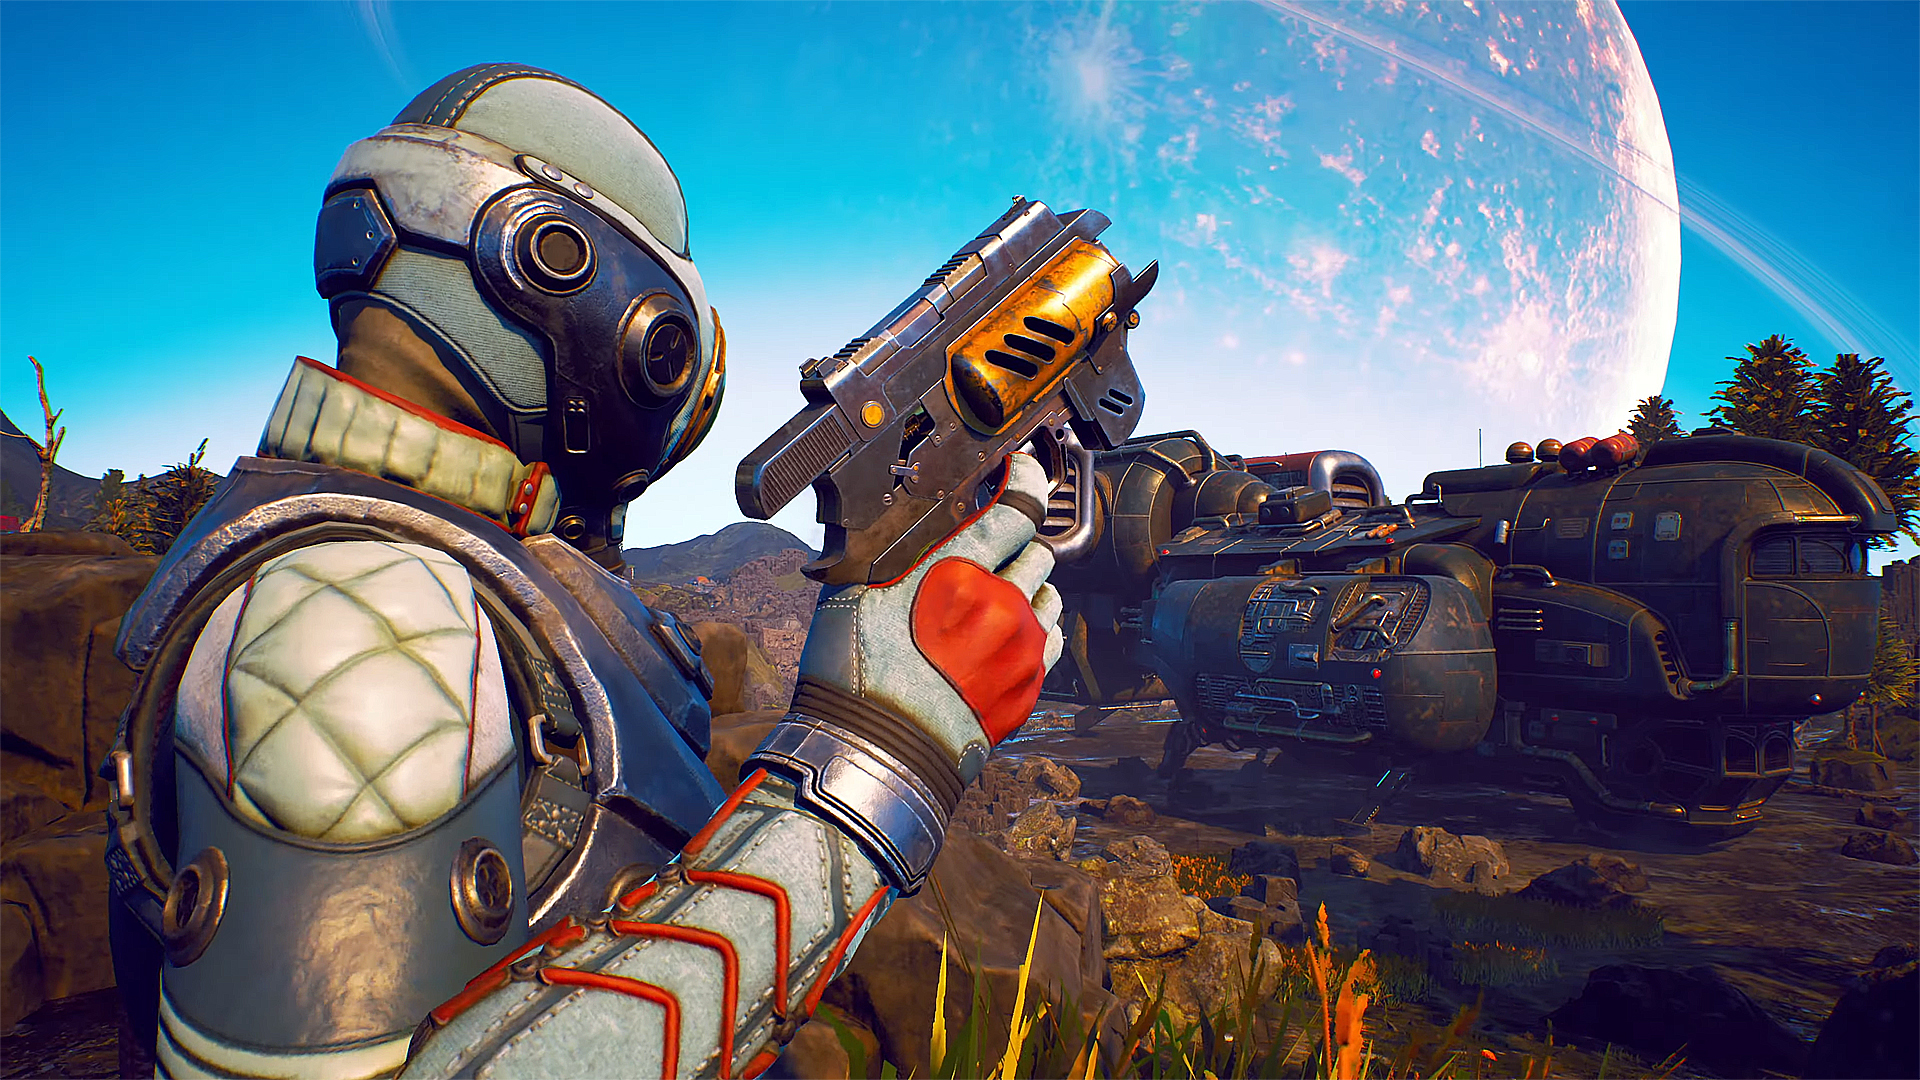 The Outer Worlds: Spacers Choice Edition Xbox Series Review